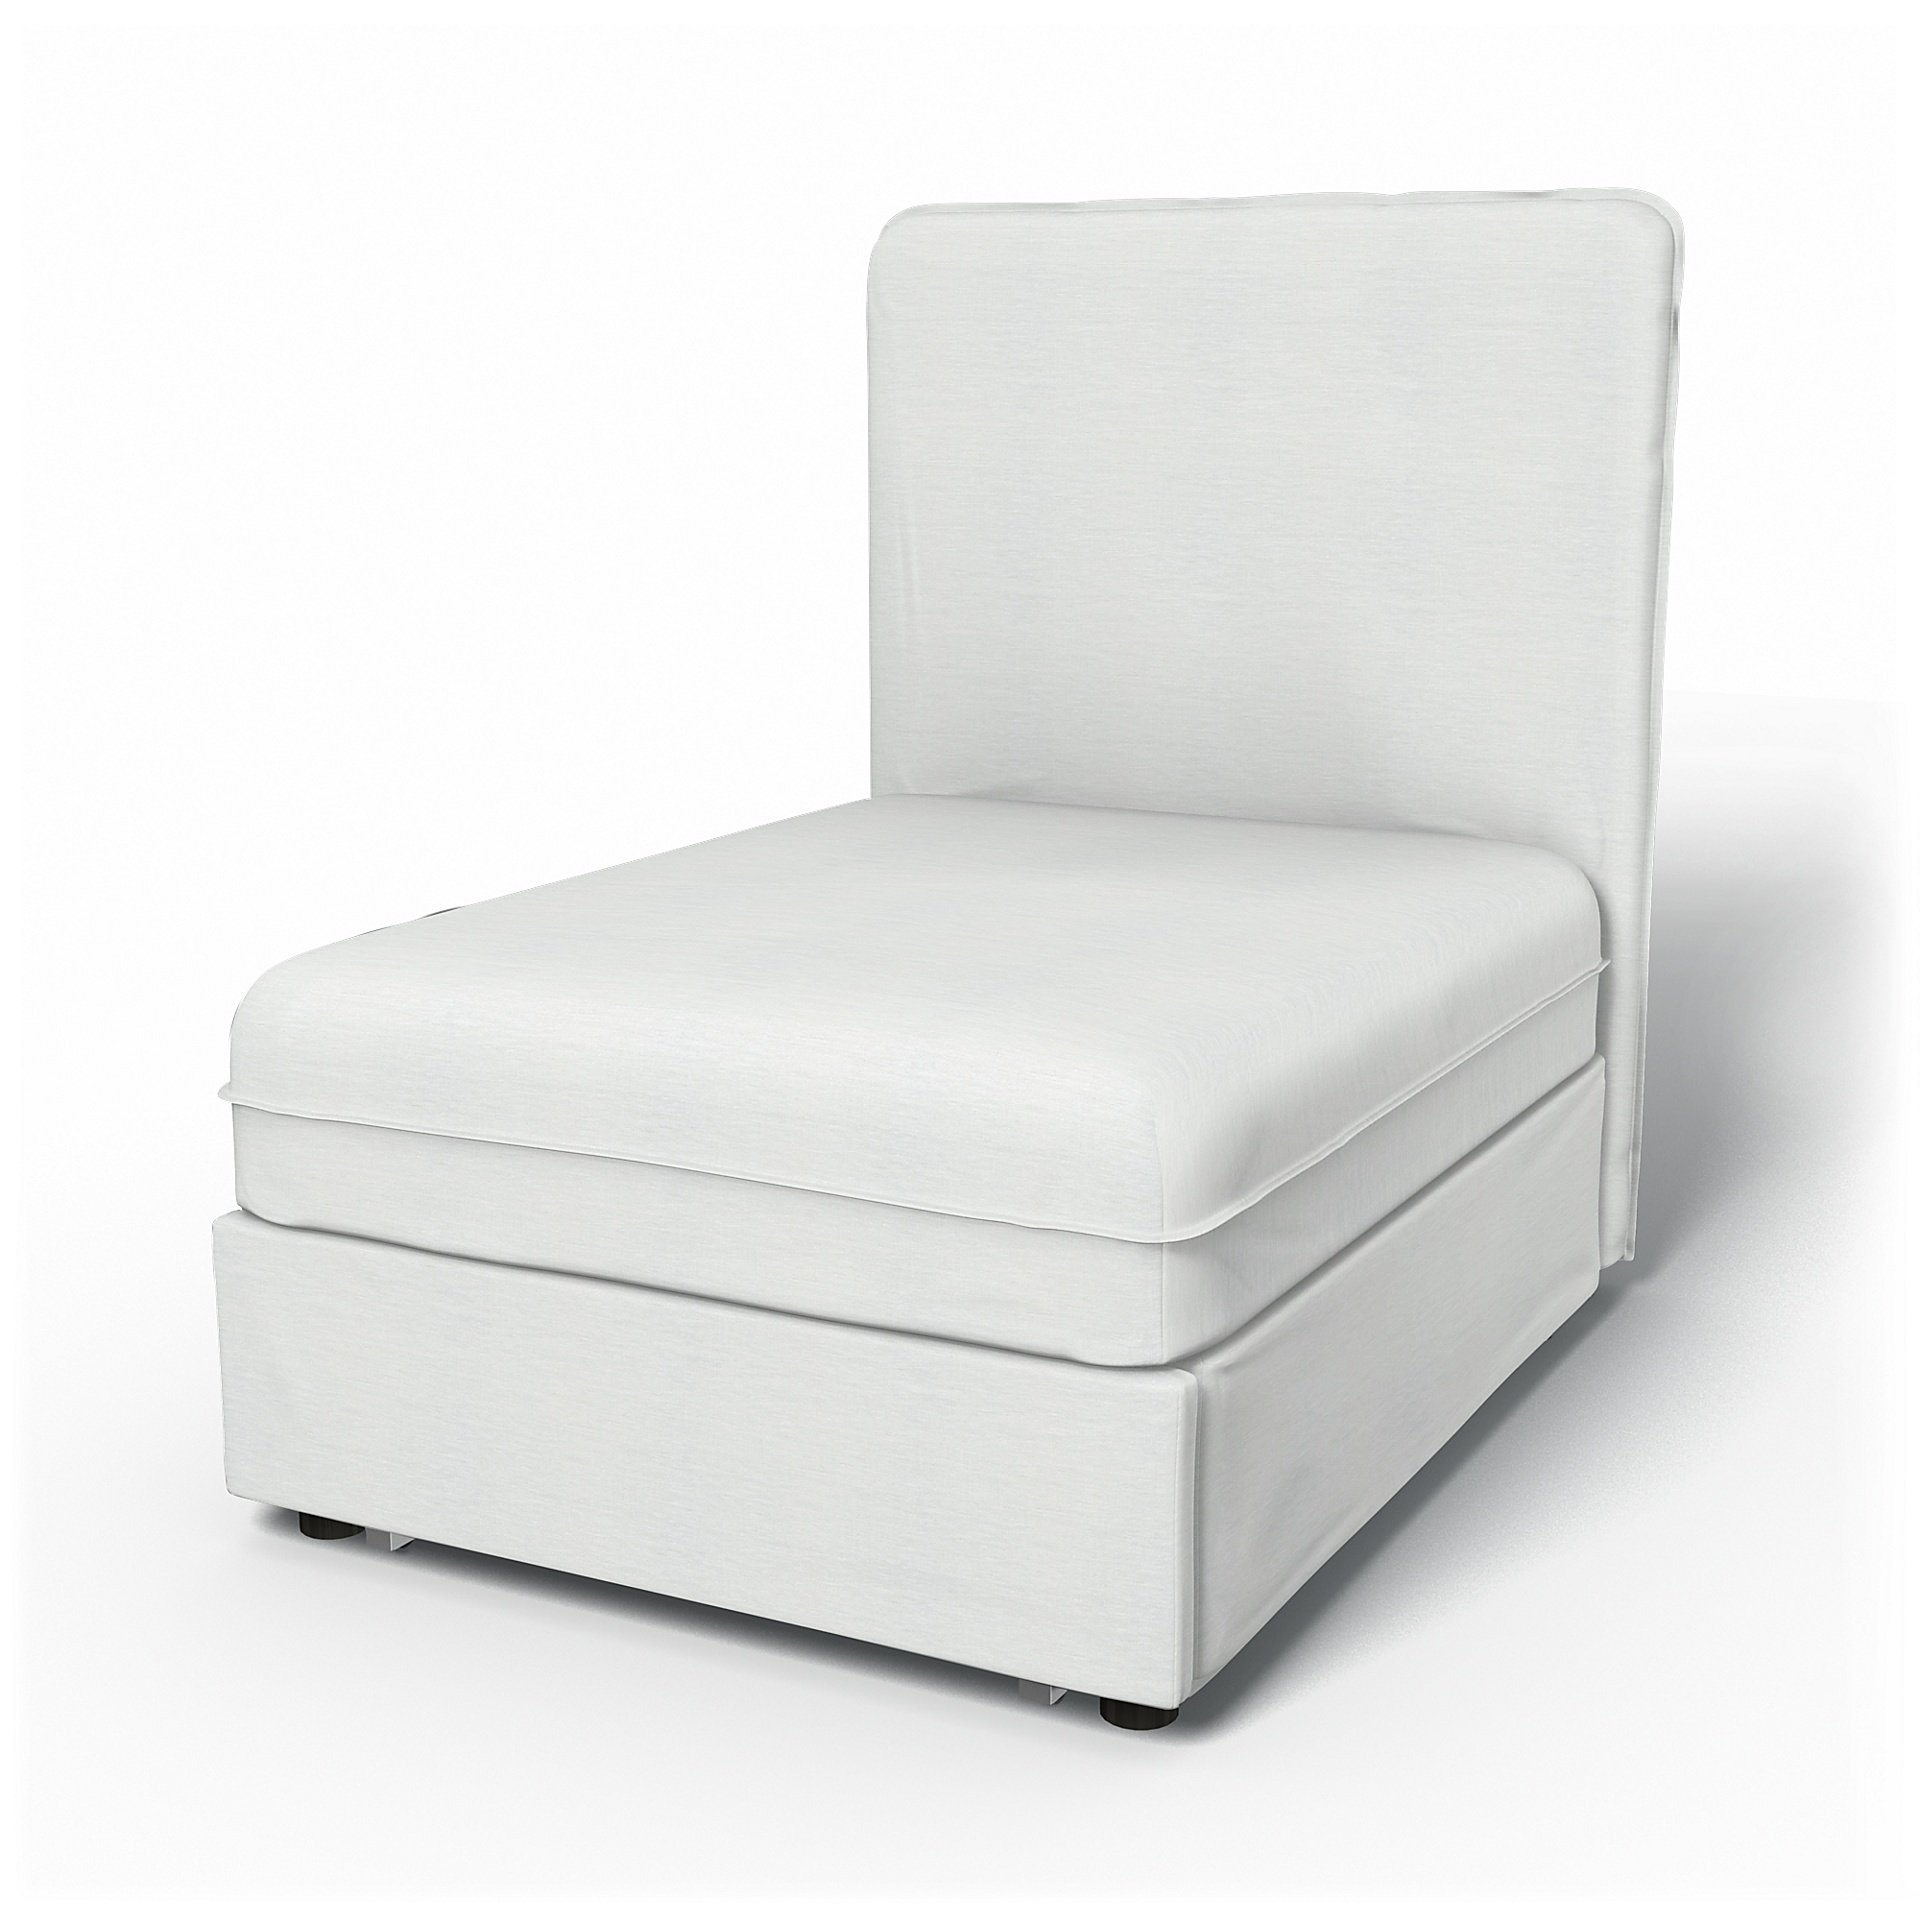 IKEA - Vallentuna Seat Module with High Back Sofa Bed Cover (80x100x46cm), White, Linen - Bemz